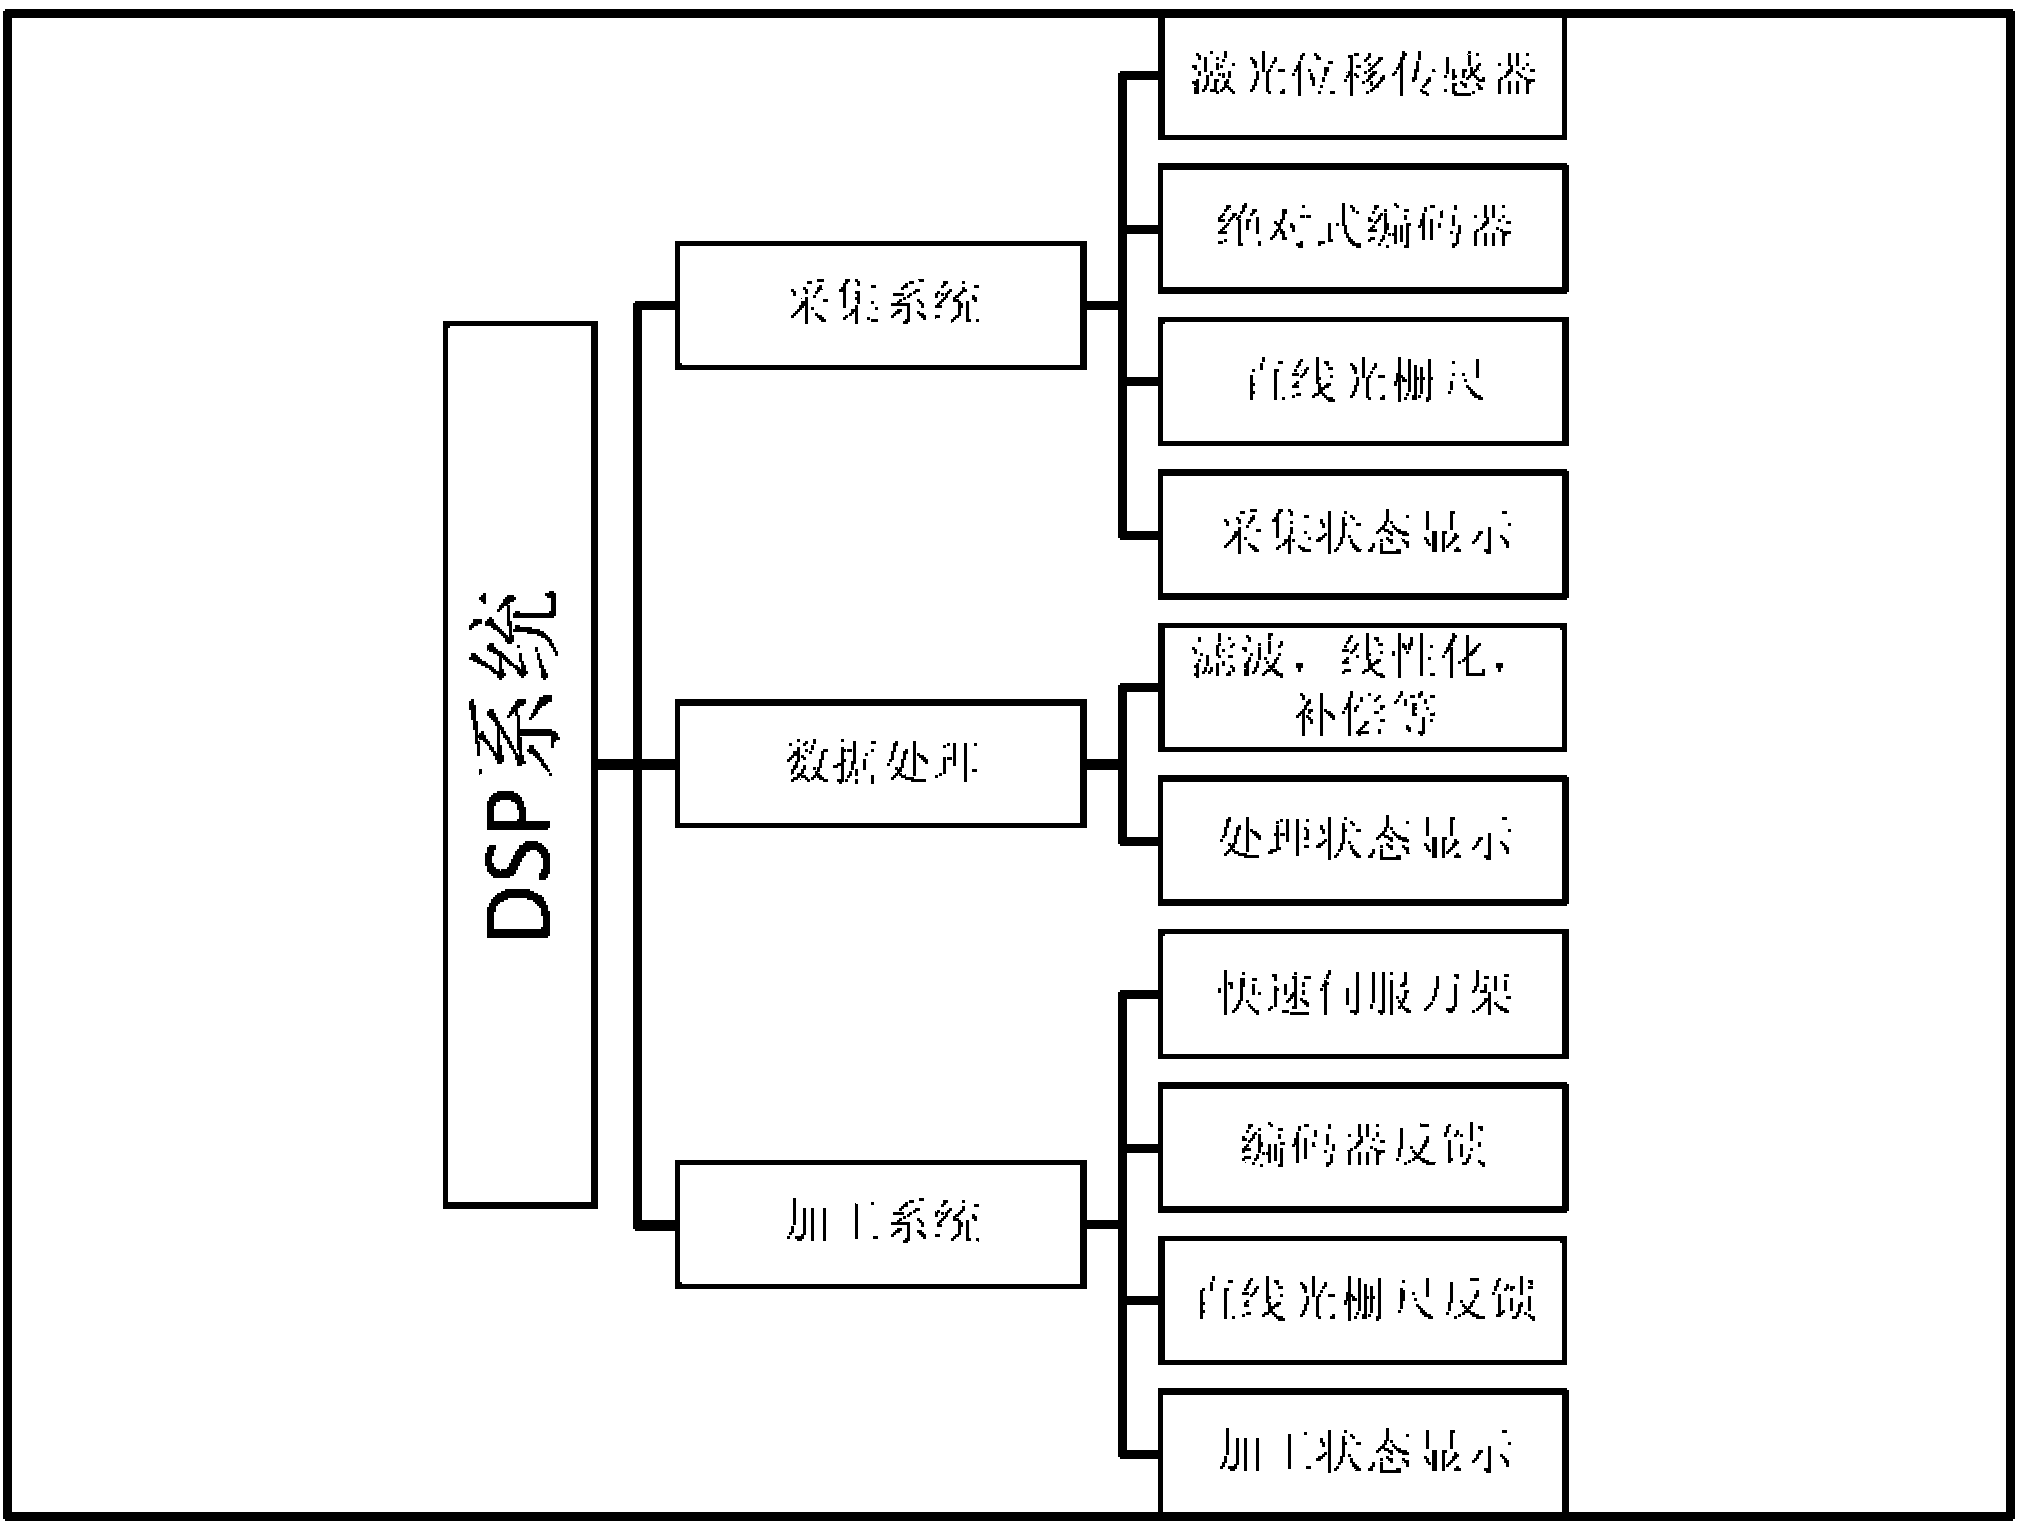 A DSP-based aerospace thin-walled disc surface topography measurement and fixture processing system